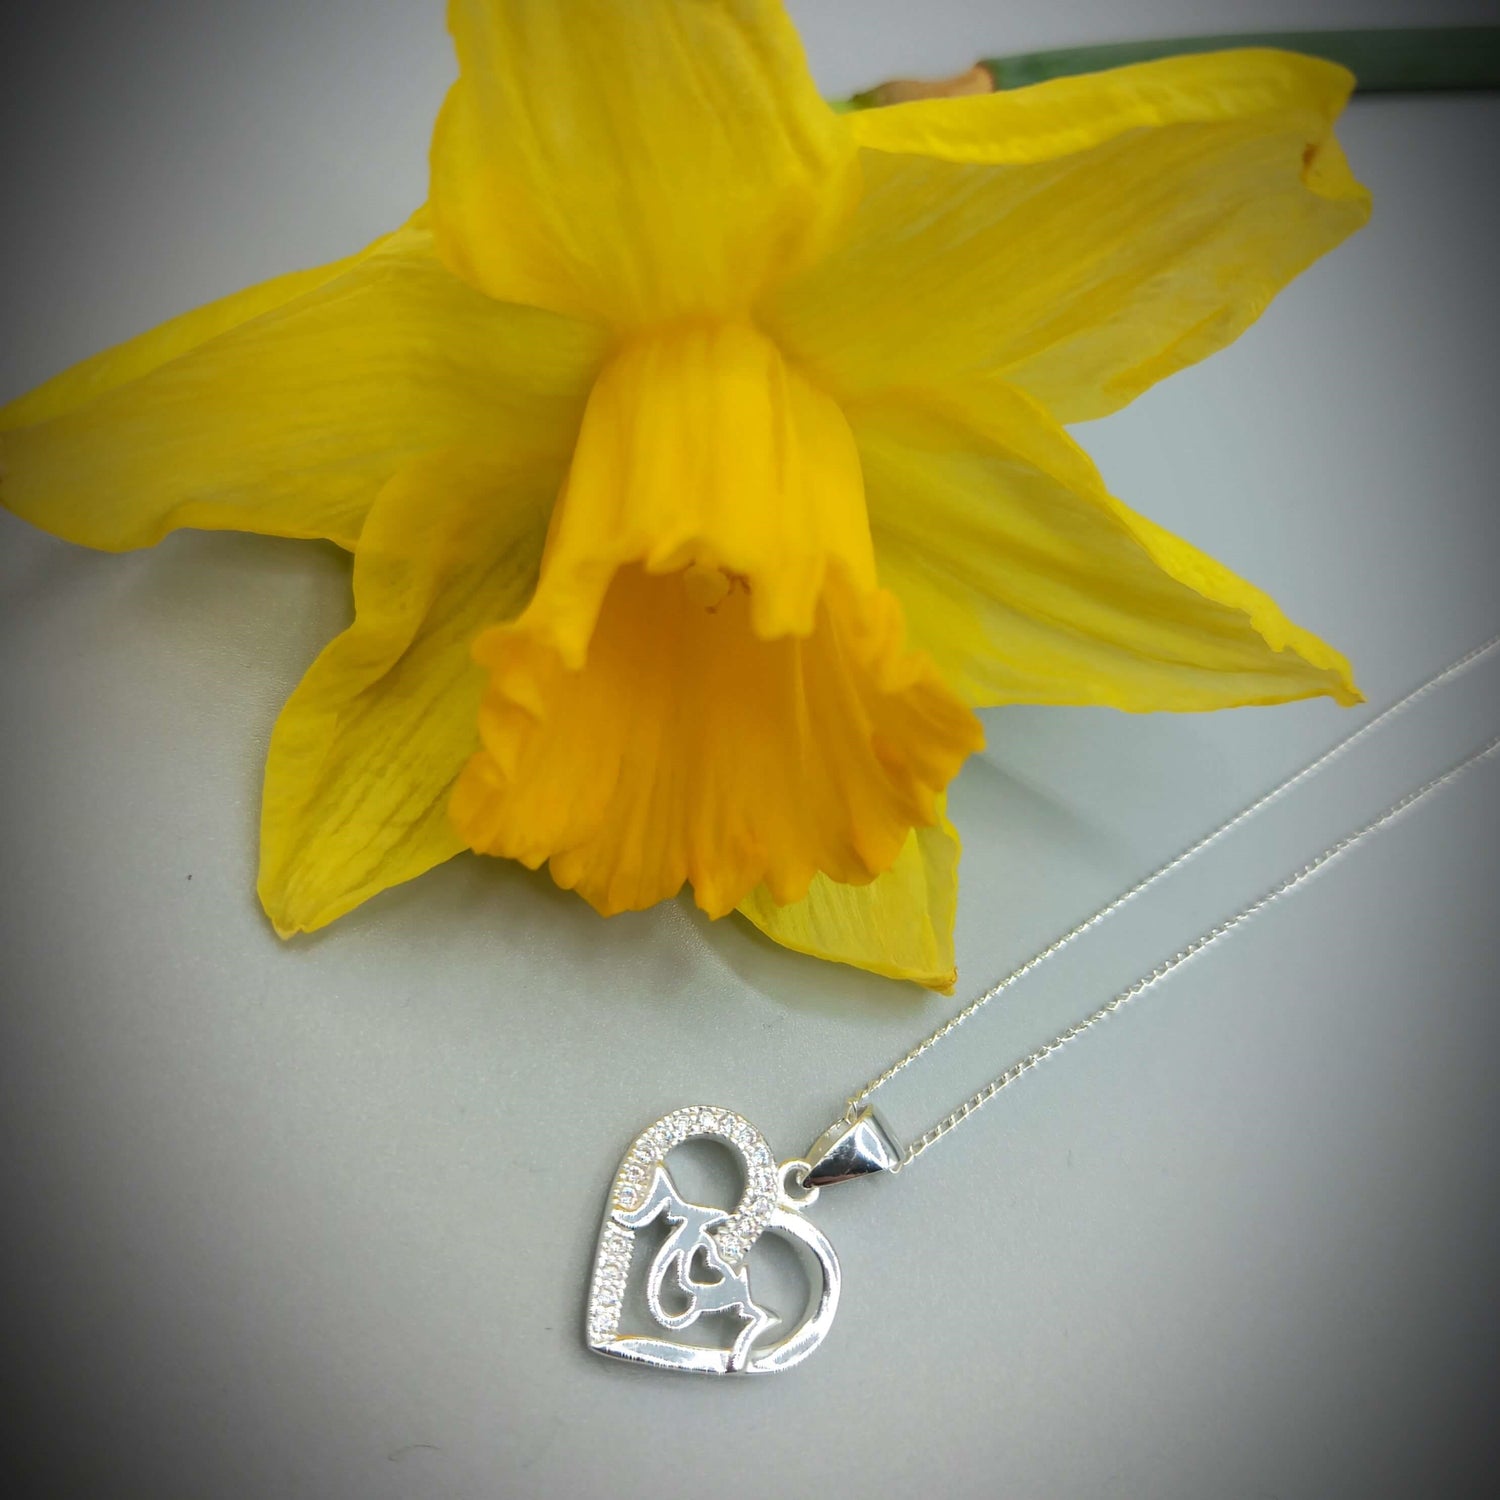 Sterling silver and cz mum pendant on a white background resting in front of a yellow flower